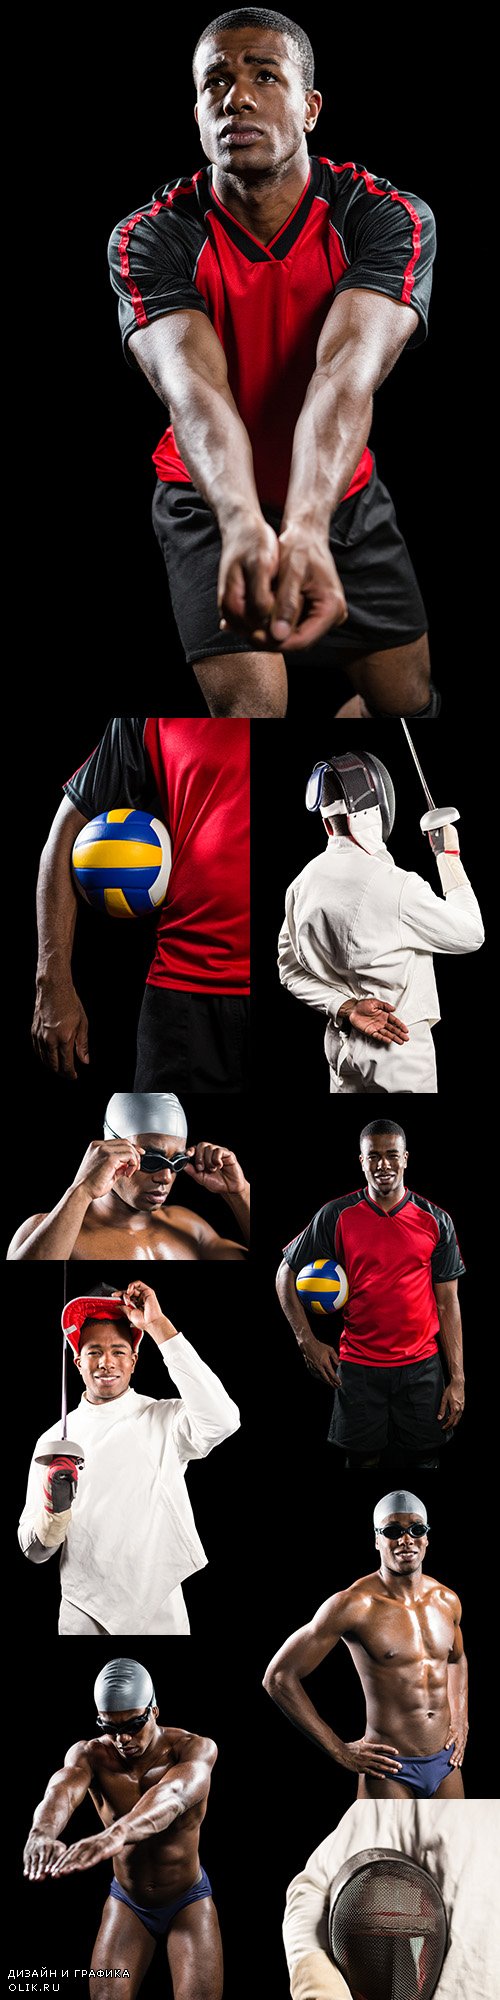 Football, swimmer and fencer professional sports